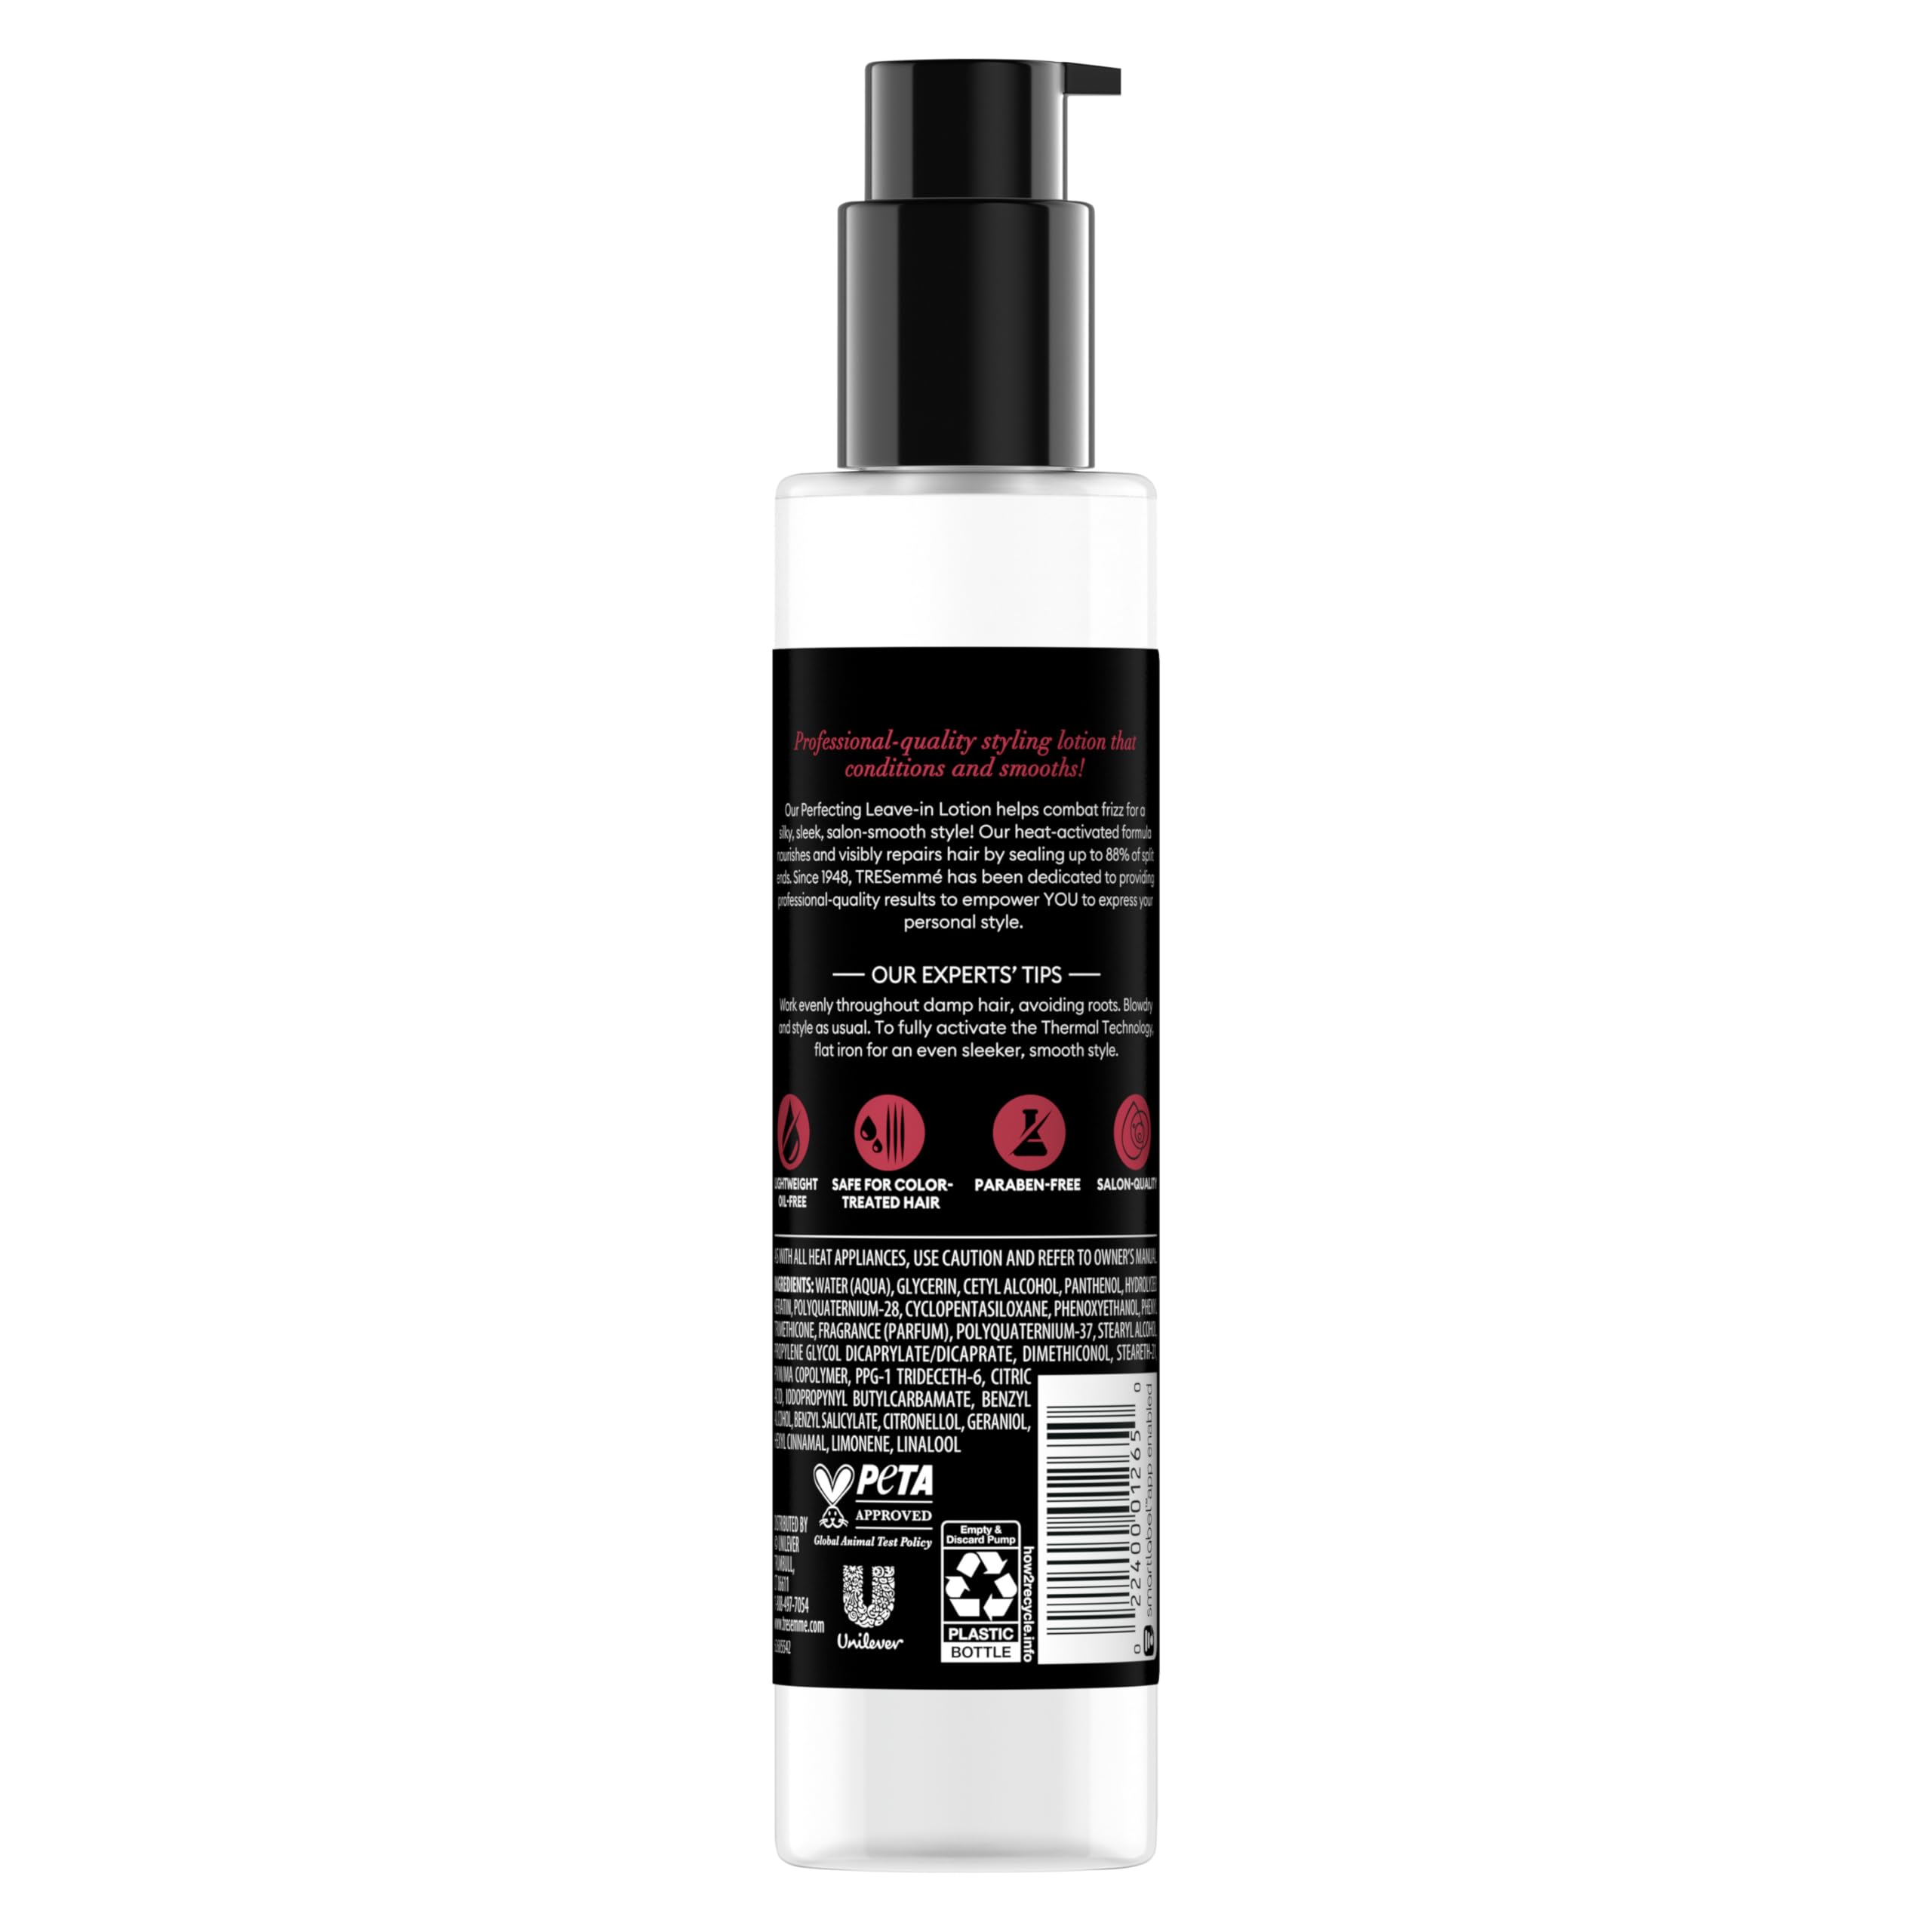 TRESemmé Perfecting Leave-In Lotion Keratin Smooth for Sleek & Shine Weightless 5.7 oz